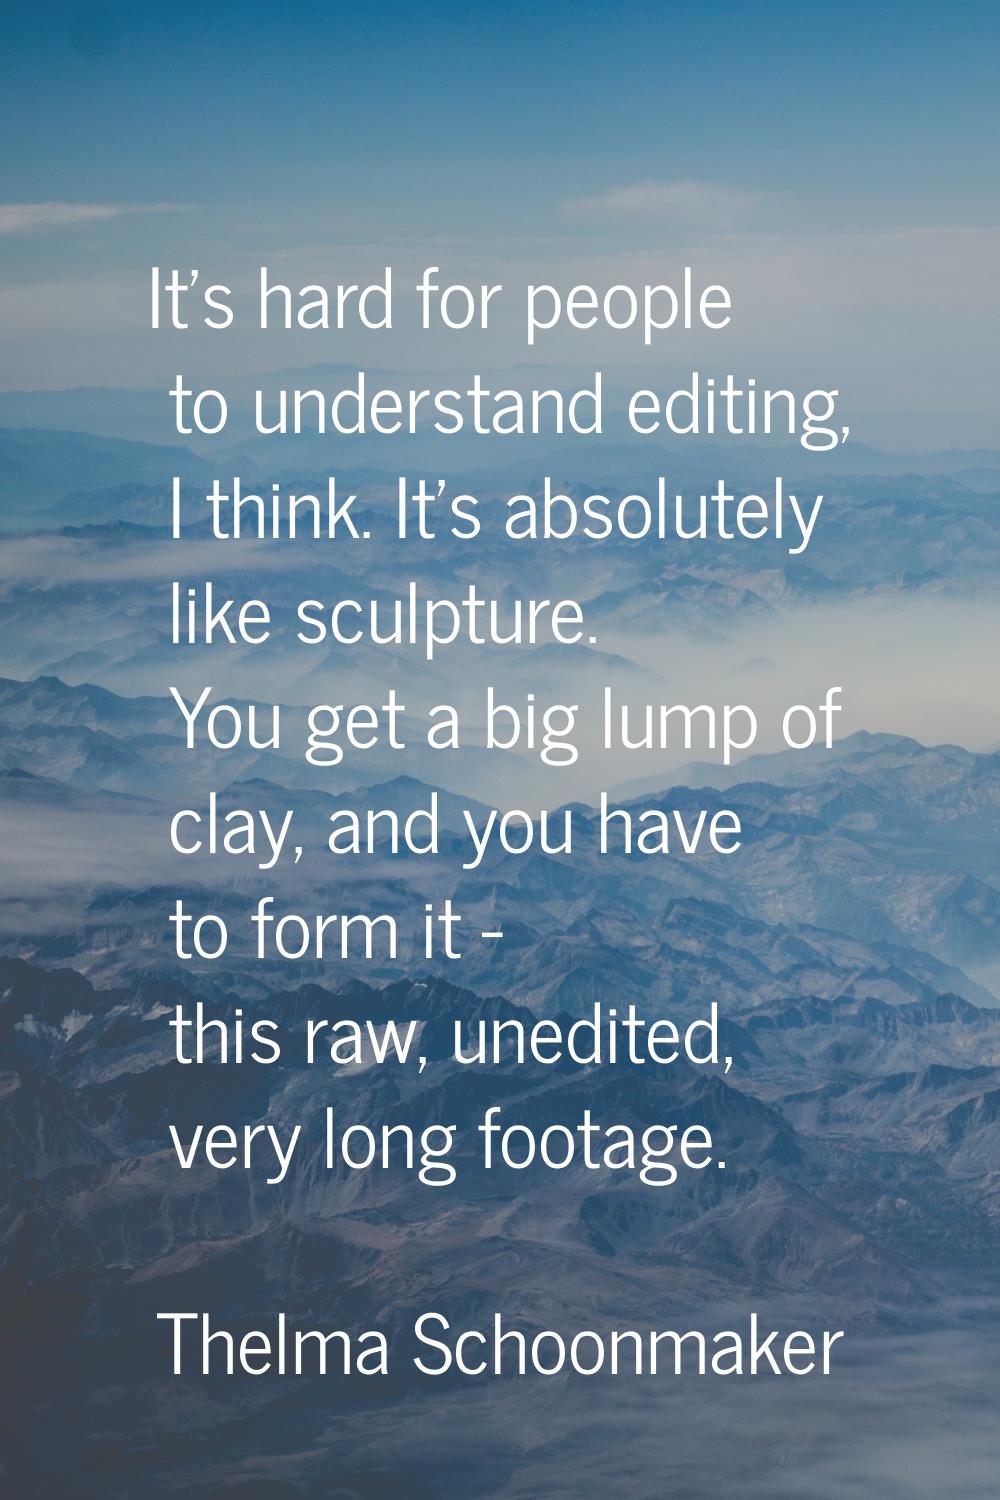 It's hard for people to understand editing, I think. It's absolutely like sculpture. You get a big 